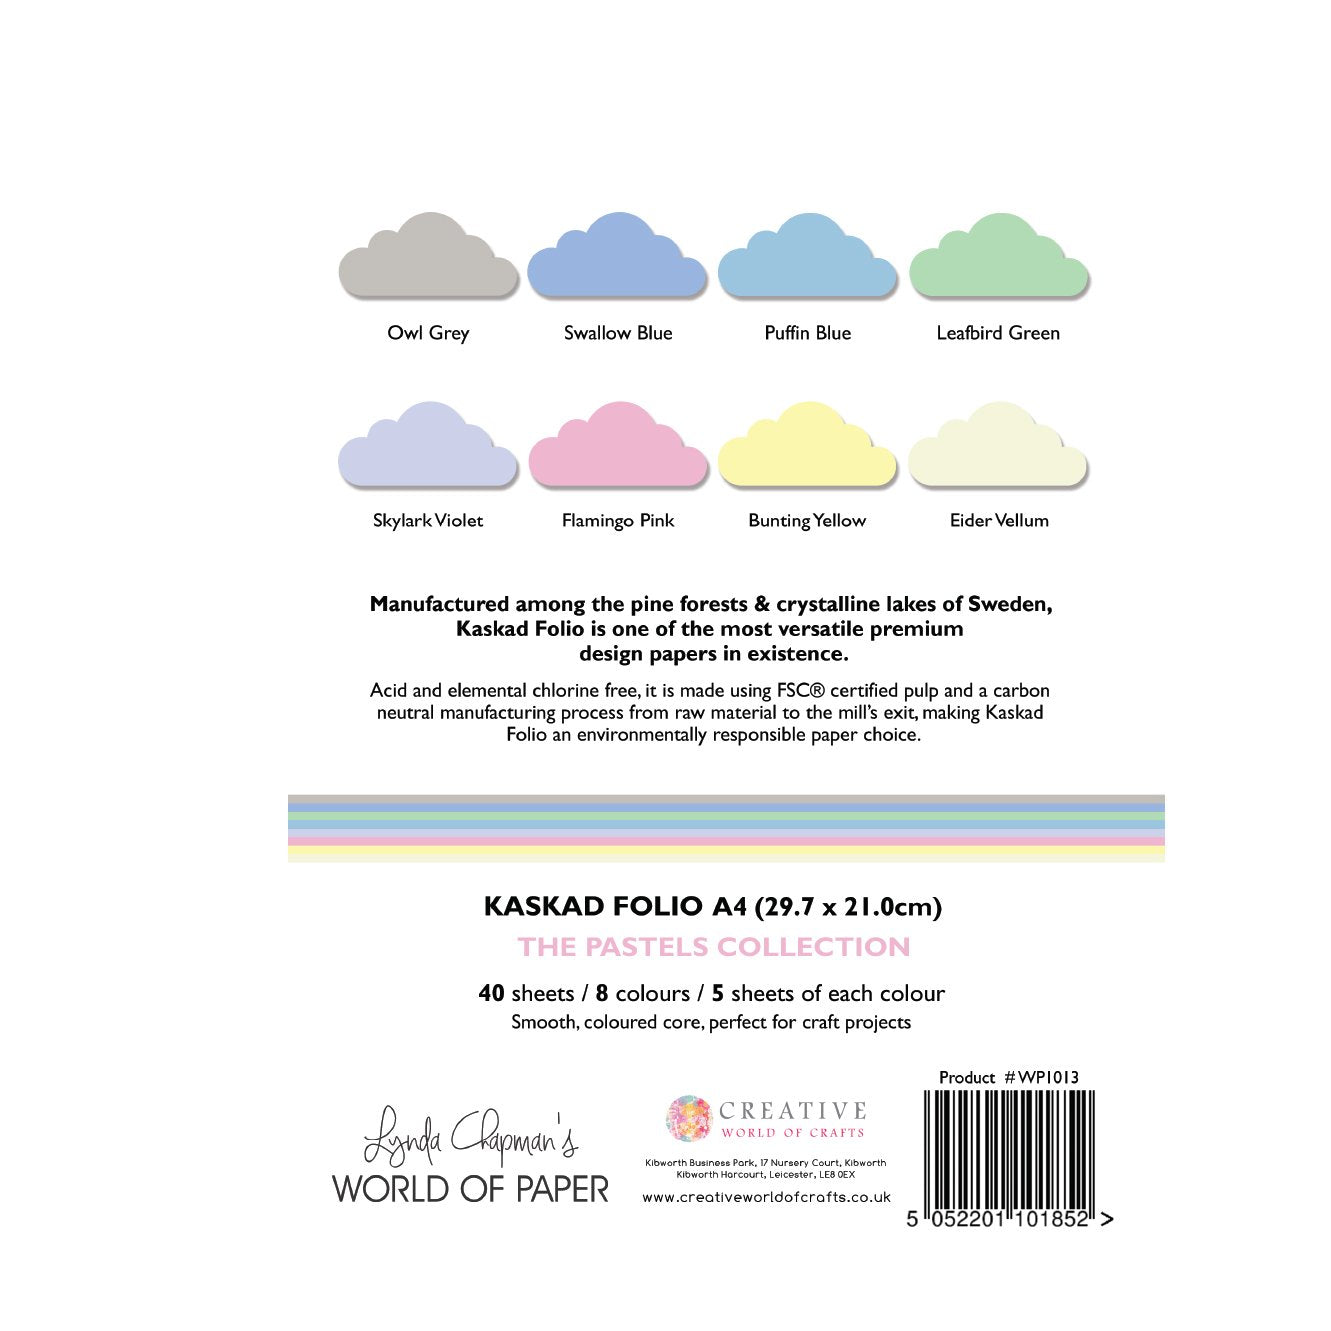 Kaskad Folio Pastels Collection A4 225gsm Coloured Core Cardstock 40 sheets